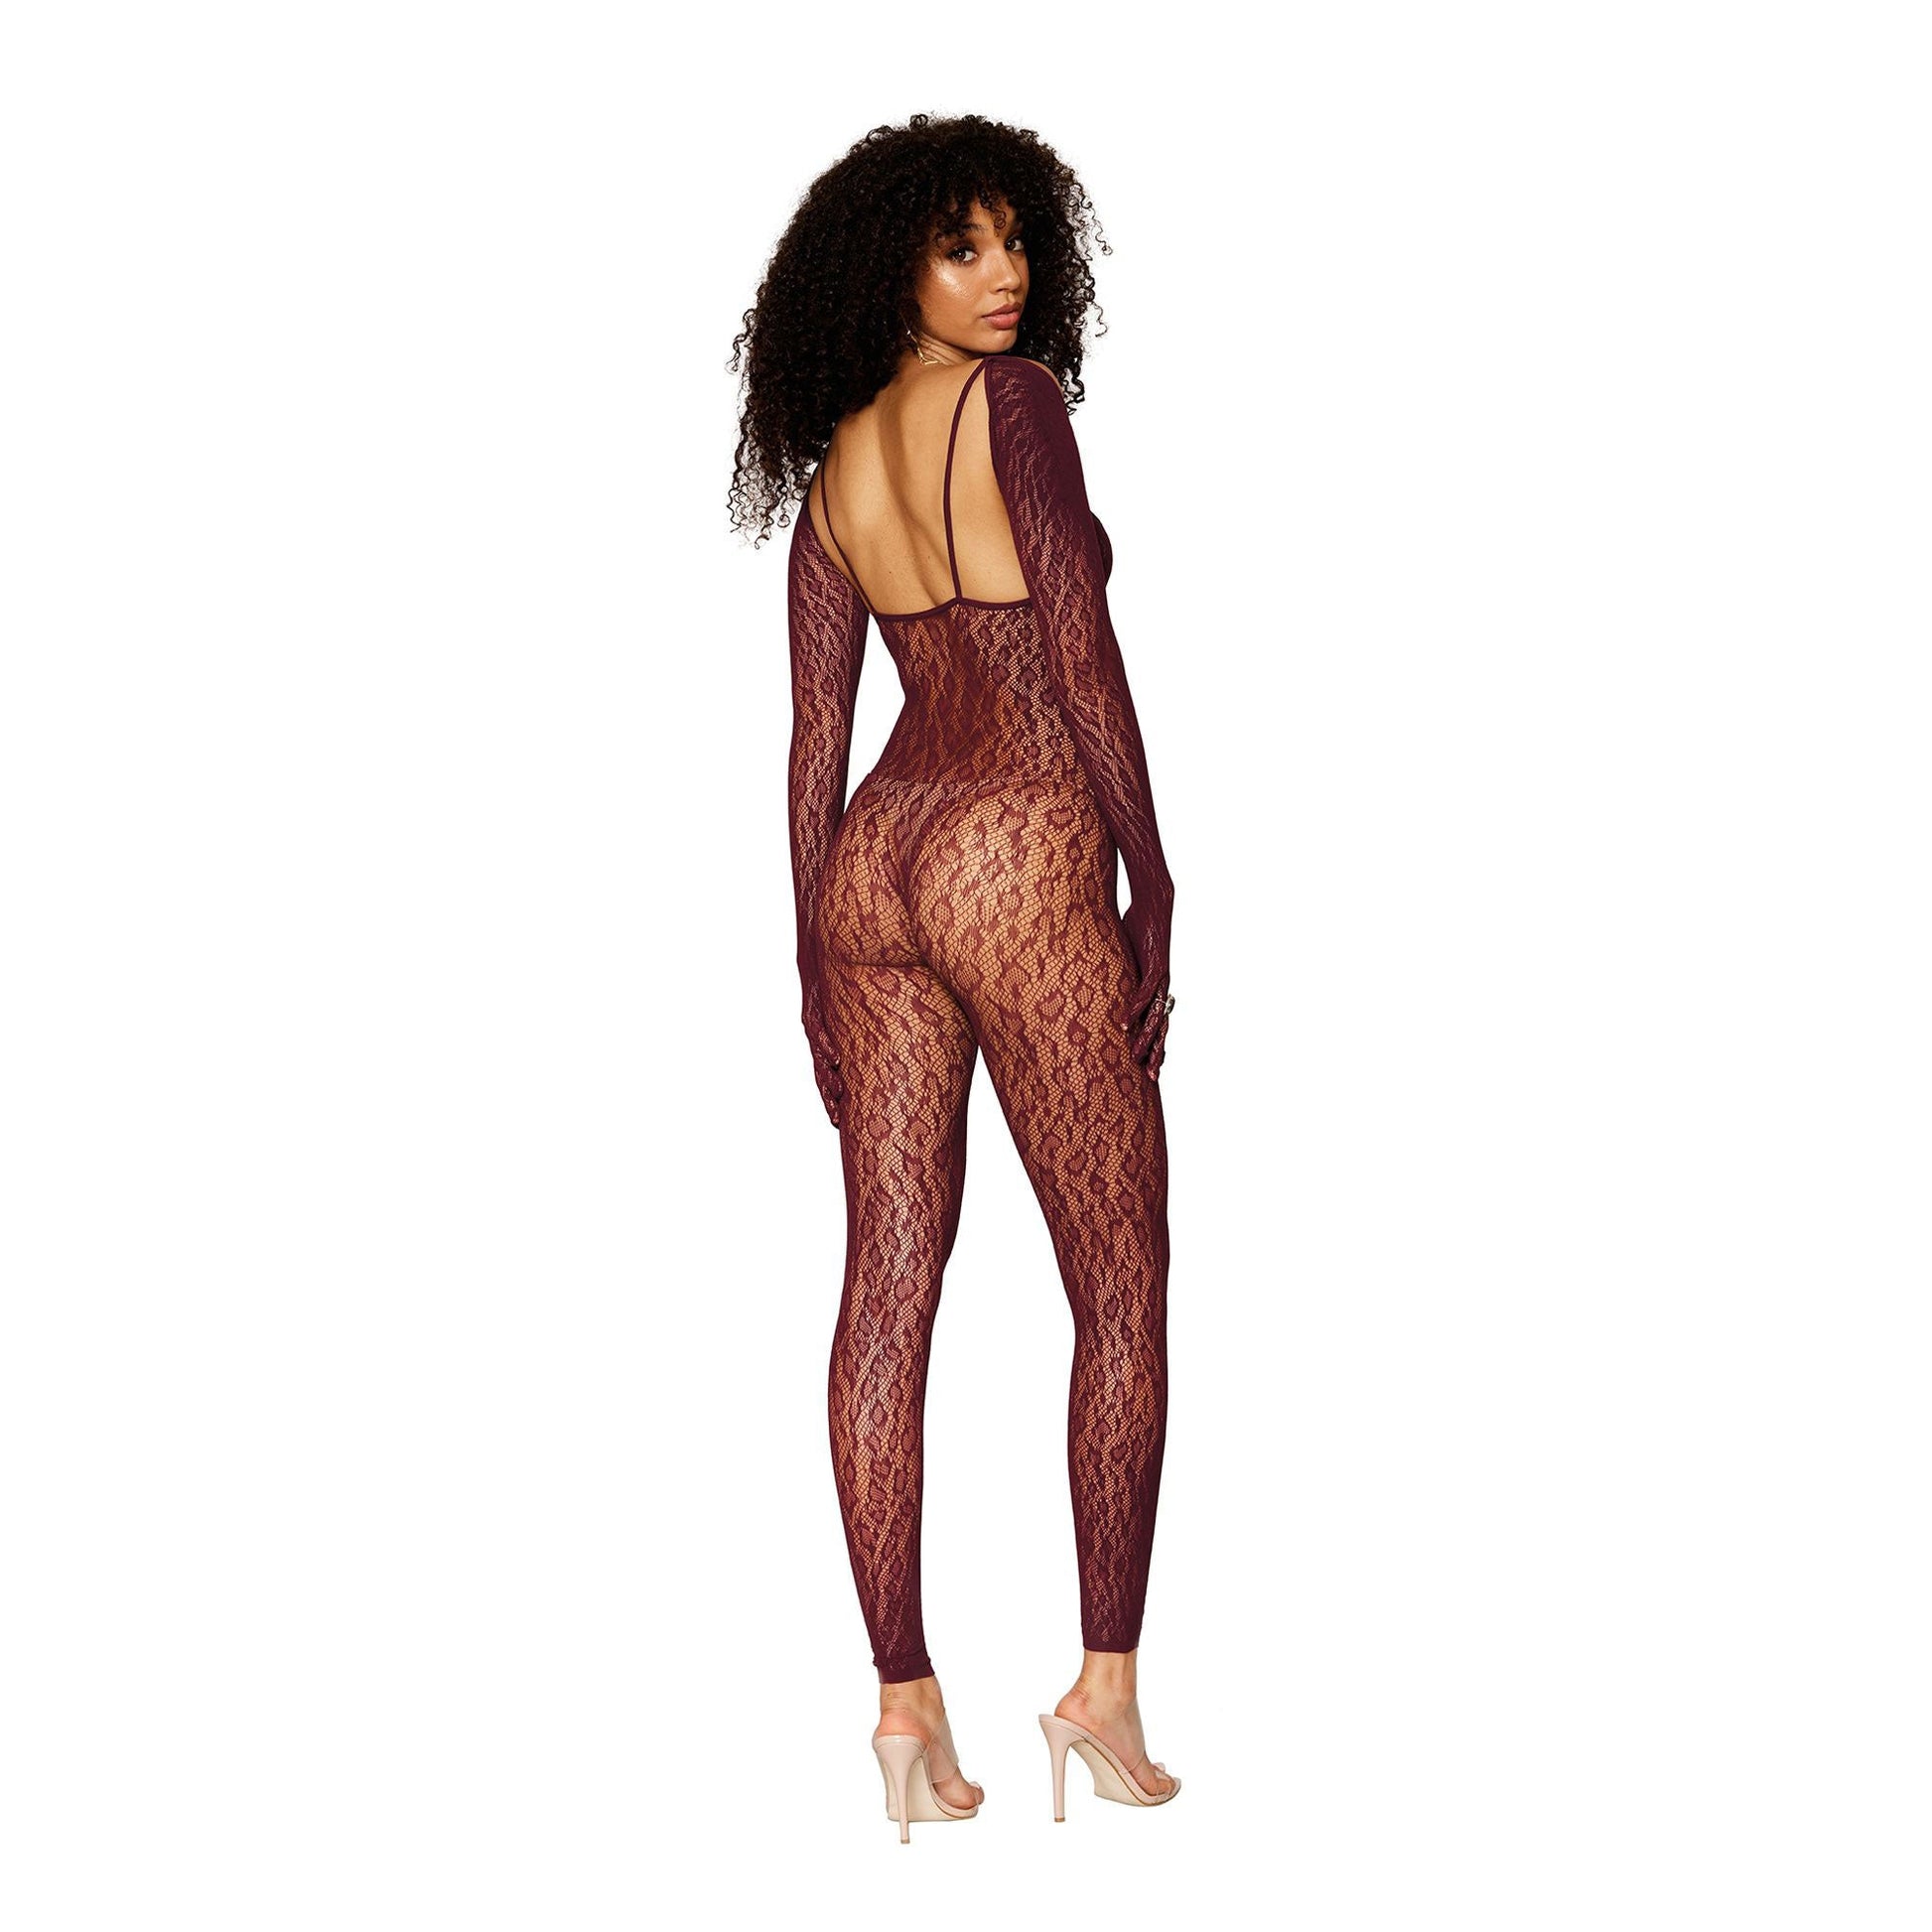 Catsuit Bodystocking and Shrug - One Size -  Burgundy